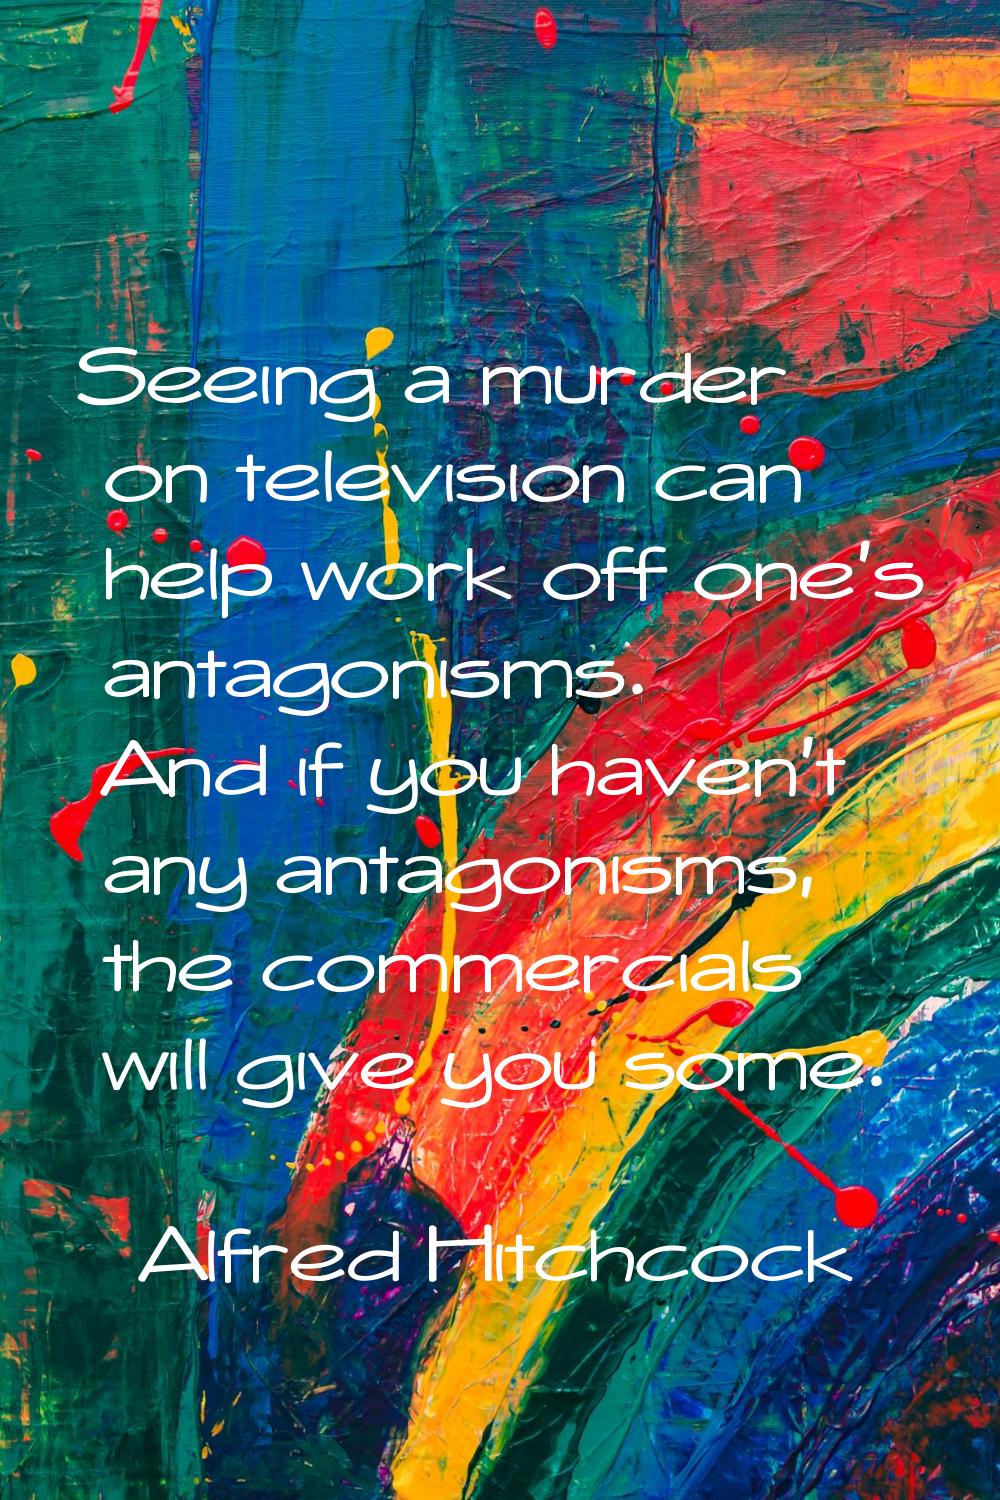 Seeing a murder on television can help work off one's antagonisms. And if you haven't any antagonis